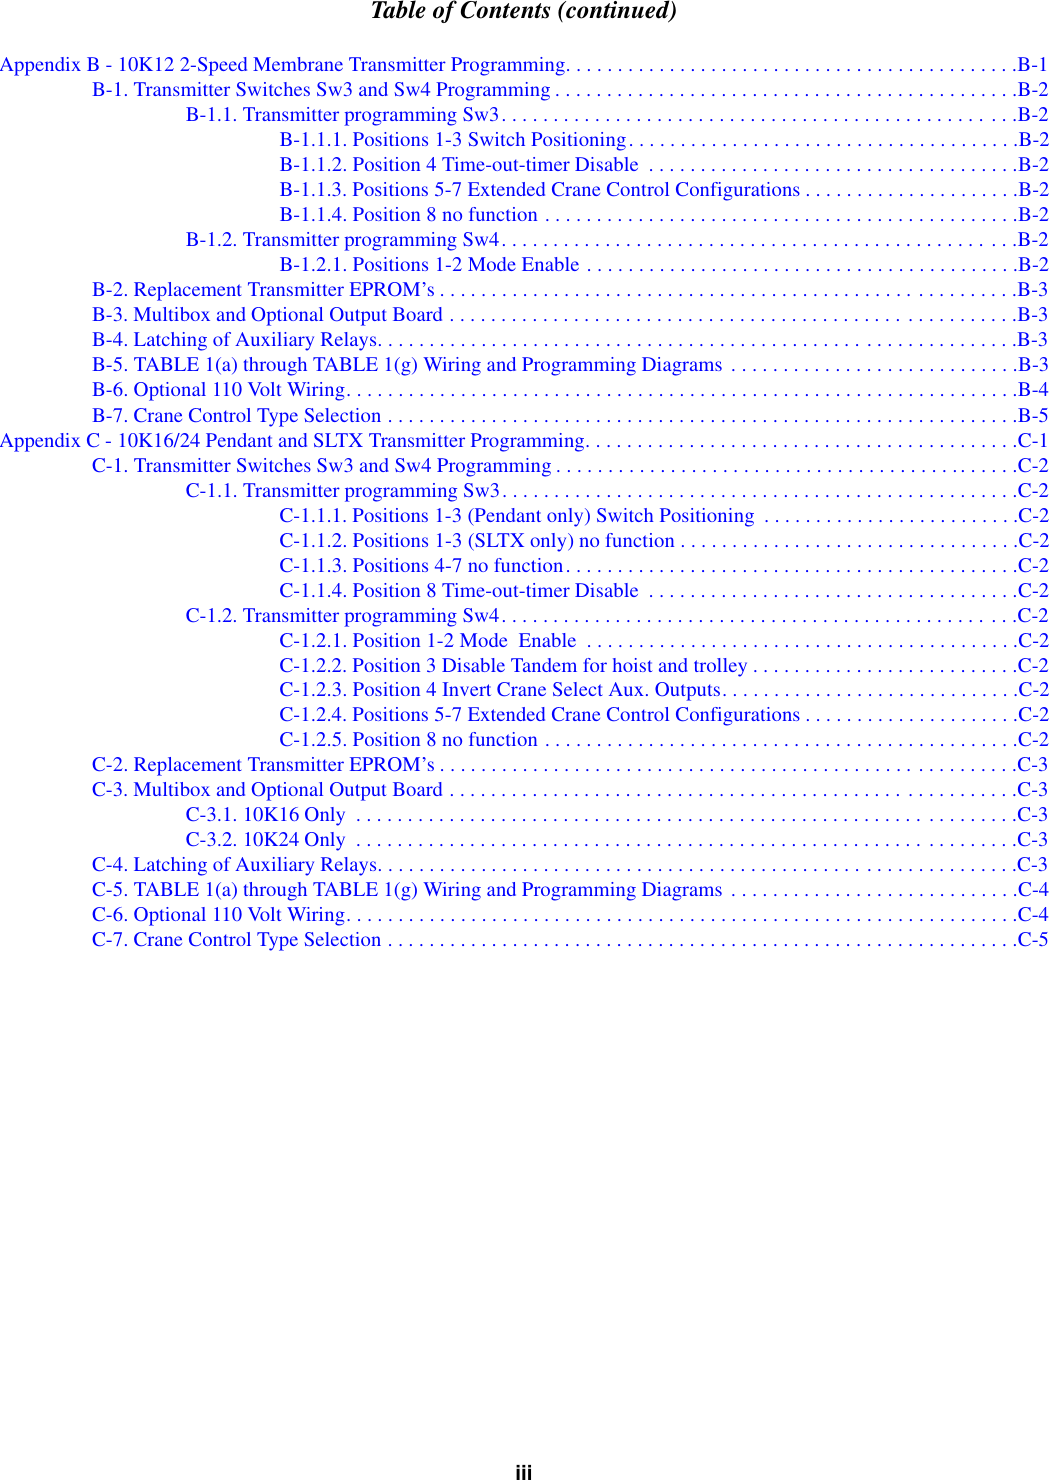 Table of Contents (continued)iiiAppendix B - 10K12 2-Speed Membrane Transmitter Programming. . . . . . . . . . . . . . . . . . . . . . . . . . . . . . . . . . . . . . . . . . . .B-1B-1. Transmitter Switches Sw3 and Sw4 Programming . . . . . . . . . . . . . . . . . . . . . . . . . . . . . . . . . . . . . . . . . . . . .B-2B-1.1. Transmitter programming Sw3. . . . . . . . . . . . . . . . . . . . . . . . . . . . . . . . . . . . . . . . . . . . . . . . . .B-2B-1.1.1. Positions 1-3 Switch Positioning. . . . . . . . . . . . . . . . . . . . . . . . . . . . . . . . . . . . . .B-2B-1.1.2. Position 4 Time-out-timer Disable  . . . . . . . . . . . . . . . . . . . . . . . . . . . . . . . . . . . .B-2B-1.1.3. Positions 5-7 Extended Crane Control Configurations . . . . . . . . . . . . . . . . . . . . .B-2B-1.1.4. Position 8 no function . . . . . . . . . . . . . . . . . . . . . . . . . . . . . . . . . . . . . . . . . . . . . .B-2B-1.2. Transmitter programming Sw4. . . . . . . . . . . . . . . . . . . . . . . . . . . . . . . . . . . . . . . . . . . . . . . . . .B-2B-1.2.1. Positions 1-2 Mode Enable . . . . . . . . . . . . . . . . . . . . . . . . . . . . . . . . . . . . . . . . . .B-2B-2. Replacement Transmitter EPROM’s . . . . . . . . . . . . . . . . . . . . . . . . . . . . . . . . . . . . . . . . . . . . . . . . . . . . . . . .B-3B-3. Multibox and Optional Output Board . . . . . . . . . . . . . . . . . . . . . . . . . . . . . . . . . . . . . . . . . . . . . . . . . . . . . . .B-3B-4. Latching of Auxiliary Relays. . . . . . . . . . . . . . . . . . . . . . . . . . . . . . . . . . . . . . . . . . . . . . . . . . . . . . . . . . . . . .B-3B-5. TABLE 1(a) through TABLE 1(g) Wiring and Programming Diagrams  . . . . . . . . . . . . . . . . . . . . . . . . . . . .B-3B-6. Optional 110 Volt Wiring. . . . . . . . . . . . . . . . . . . . . . . . . . . . . . . . . . . . . . . . . . . . . . . . . . . . . . . . . . . . . . . . .B-4B-7. Crane Control Type Selection . . . . . . . . . . . . . . . . . . . . . . . . . . . . . . . . . . . . . . . . . . . . . . . . . . . . . . . . . . . . .B-5Appendix C - 10K16/24 Pendant and SLTX Transmitter Programming. . . . . . . . . . . . . . . . . . . . . . . . . . . . . . . . . . . . . . . . . .C-1C-1. Transmitter Switches Sw3 and Sw4 Programming . . . . . . . . . . . . . . . . . . . . . . . . . . . . . . . . . . . . . . . . . . . . .C-2C-1.1. Transmitter programming Sw3. . . . . . . . . . . . . . . . . . . . . . . . . . . . . . . . . . . . . . . . . . . . . . . . . .C-2C-1.1.1. Positions 1-3 (Pendant only) Switch Positioning  . . . . . . . . . . . . . . . . . . . . . . . . .C-2C-1.1.2. Positions 1-3 (SLTX only) no function . . . . . . . . . . . . . . . . . . . . . . . . . . . . . . . . .C-2C-1.1.3. Positions 4-7 no function. . . . . . . . . . . . . . . . . . . . . . . . . . . . . . . . . . . . . . . . . . . .C-2C-1.1.4. Position 8 Time-out-timer Disable  . . . . . . . . . . . . . . . . . . . . . . . . . . . . . . . . . . . .C-2C-1.2. Transmitter programming Sw4. . . . . . . . . . . . . . . . . . . . . . . . . . . . . . . . . . . . . . . . . . . . . . . . . .C-2C-1.2.1. Position 1-2 Mode  Enable  . . . . . . . . . . . . . . . . . . . . . . . . . . . . . . . . . . . . . . . . . .C-2C-1.2.2. Position 3 Disable Tandem for hoist and trolley . . . . . . . . . . . . . . . . . . . . . . . . . .C-2C-1.2.3. Position 4 Invert Crane Select Aux. Outputs. . . . . . . . . . . . . . . . . . . . . . . . . . . . .C-2C-1.2.4. Positions 5-7 Extended Crane Control Configurations . . . . . . . . . . . . . . . . . . . . .C-2C-1.2.5. Position 8 no function . . . . . . . . . . . . . . . . . . . . . . . . . . . . . . . . . . . . . . . . . . . . . .C-2C-2. Replacement Transmitter EPROM’s . . . . . . . . . . . . . . . . . . . . . . . . . . . . . . . . . . . . . . . . . . . . . . . . . . . . . . . .C-3C-3. Multibox and Optional Output Board . . . . . . . . . . . . . . . . . . . . . . . . . . . . . . . . . . . . . . . . . . . . . . . . . . . . . . .C-3C-3.1. 10K16 Only  . . . . . . . . . . . . . . . . . . . . . . . . . . . . . . . . . . . . . . . . . . . . . . . . . . . . . . . . . . . . . . . .C-3C-3.2. 10K24 Only  . . . . . . . . . . . . . . . . . . . . . . . . . . . . . . . . . . . . . . . . . . . . . . . . . . . . . . . . . . . . . . . .C-3C-4. Latching of Auxiliary Relays. . . . . . . . . . . . . . . . . . . . . . . . . . . . . . . . . . . . . . . . . . . . . . . . . . . . . . . . . . . . . .C-3C-5. TABLE 1(a) through TABLE 1(g) Wiring and Programming Diagrams  . . . . . . . . . . . . . . . . . . . . . . . . . . . .C-4C-6. Optional 110 Volt Wiring. . . . . . . . . . . . . . . . . . . . . . . . . . . . . . . . . . . . . . . . . . . . . . . . . . . . . . . . . . . . . . . . .C-4C-7. Crane Control Type Selection . . . . . . . . . . . . . . . . . . . . . . . . . . . . . . . . . . . . . . . . . . . . . . . . . . . . . . . . . . . . .C-5